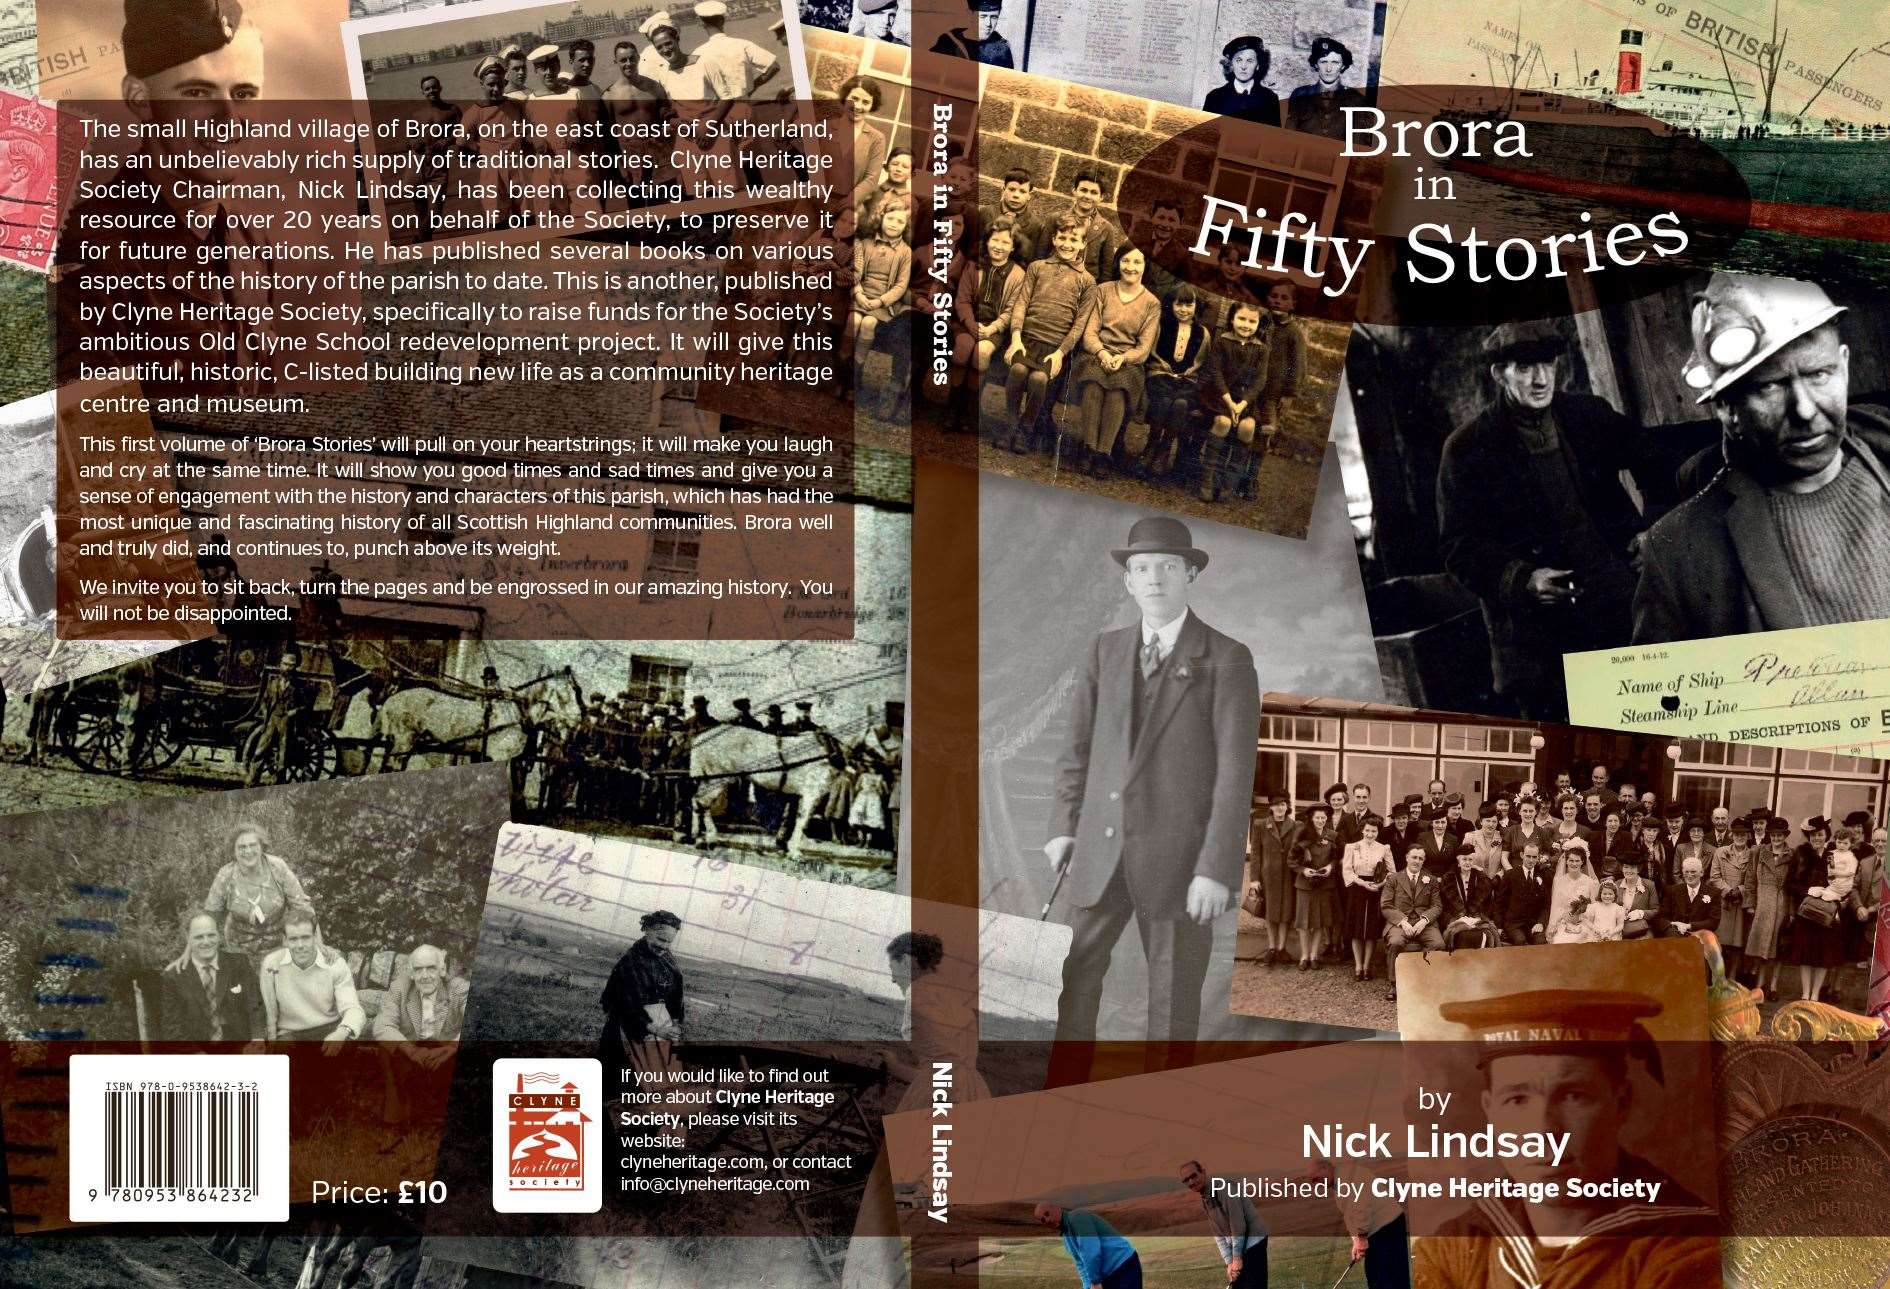 The front and back cover of Brora in Fifty Stories, which has been published by Clyne Heritage Society (www.clyneheritage.com).